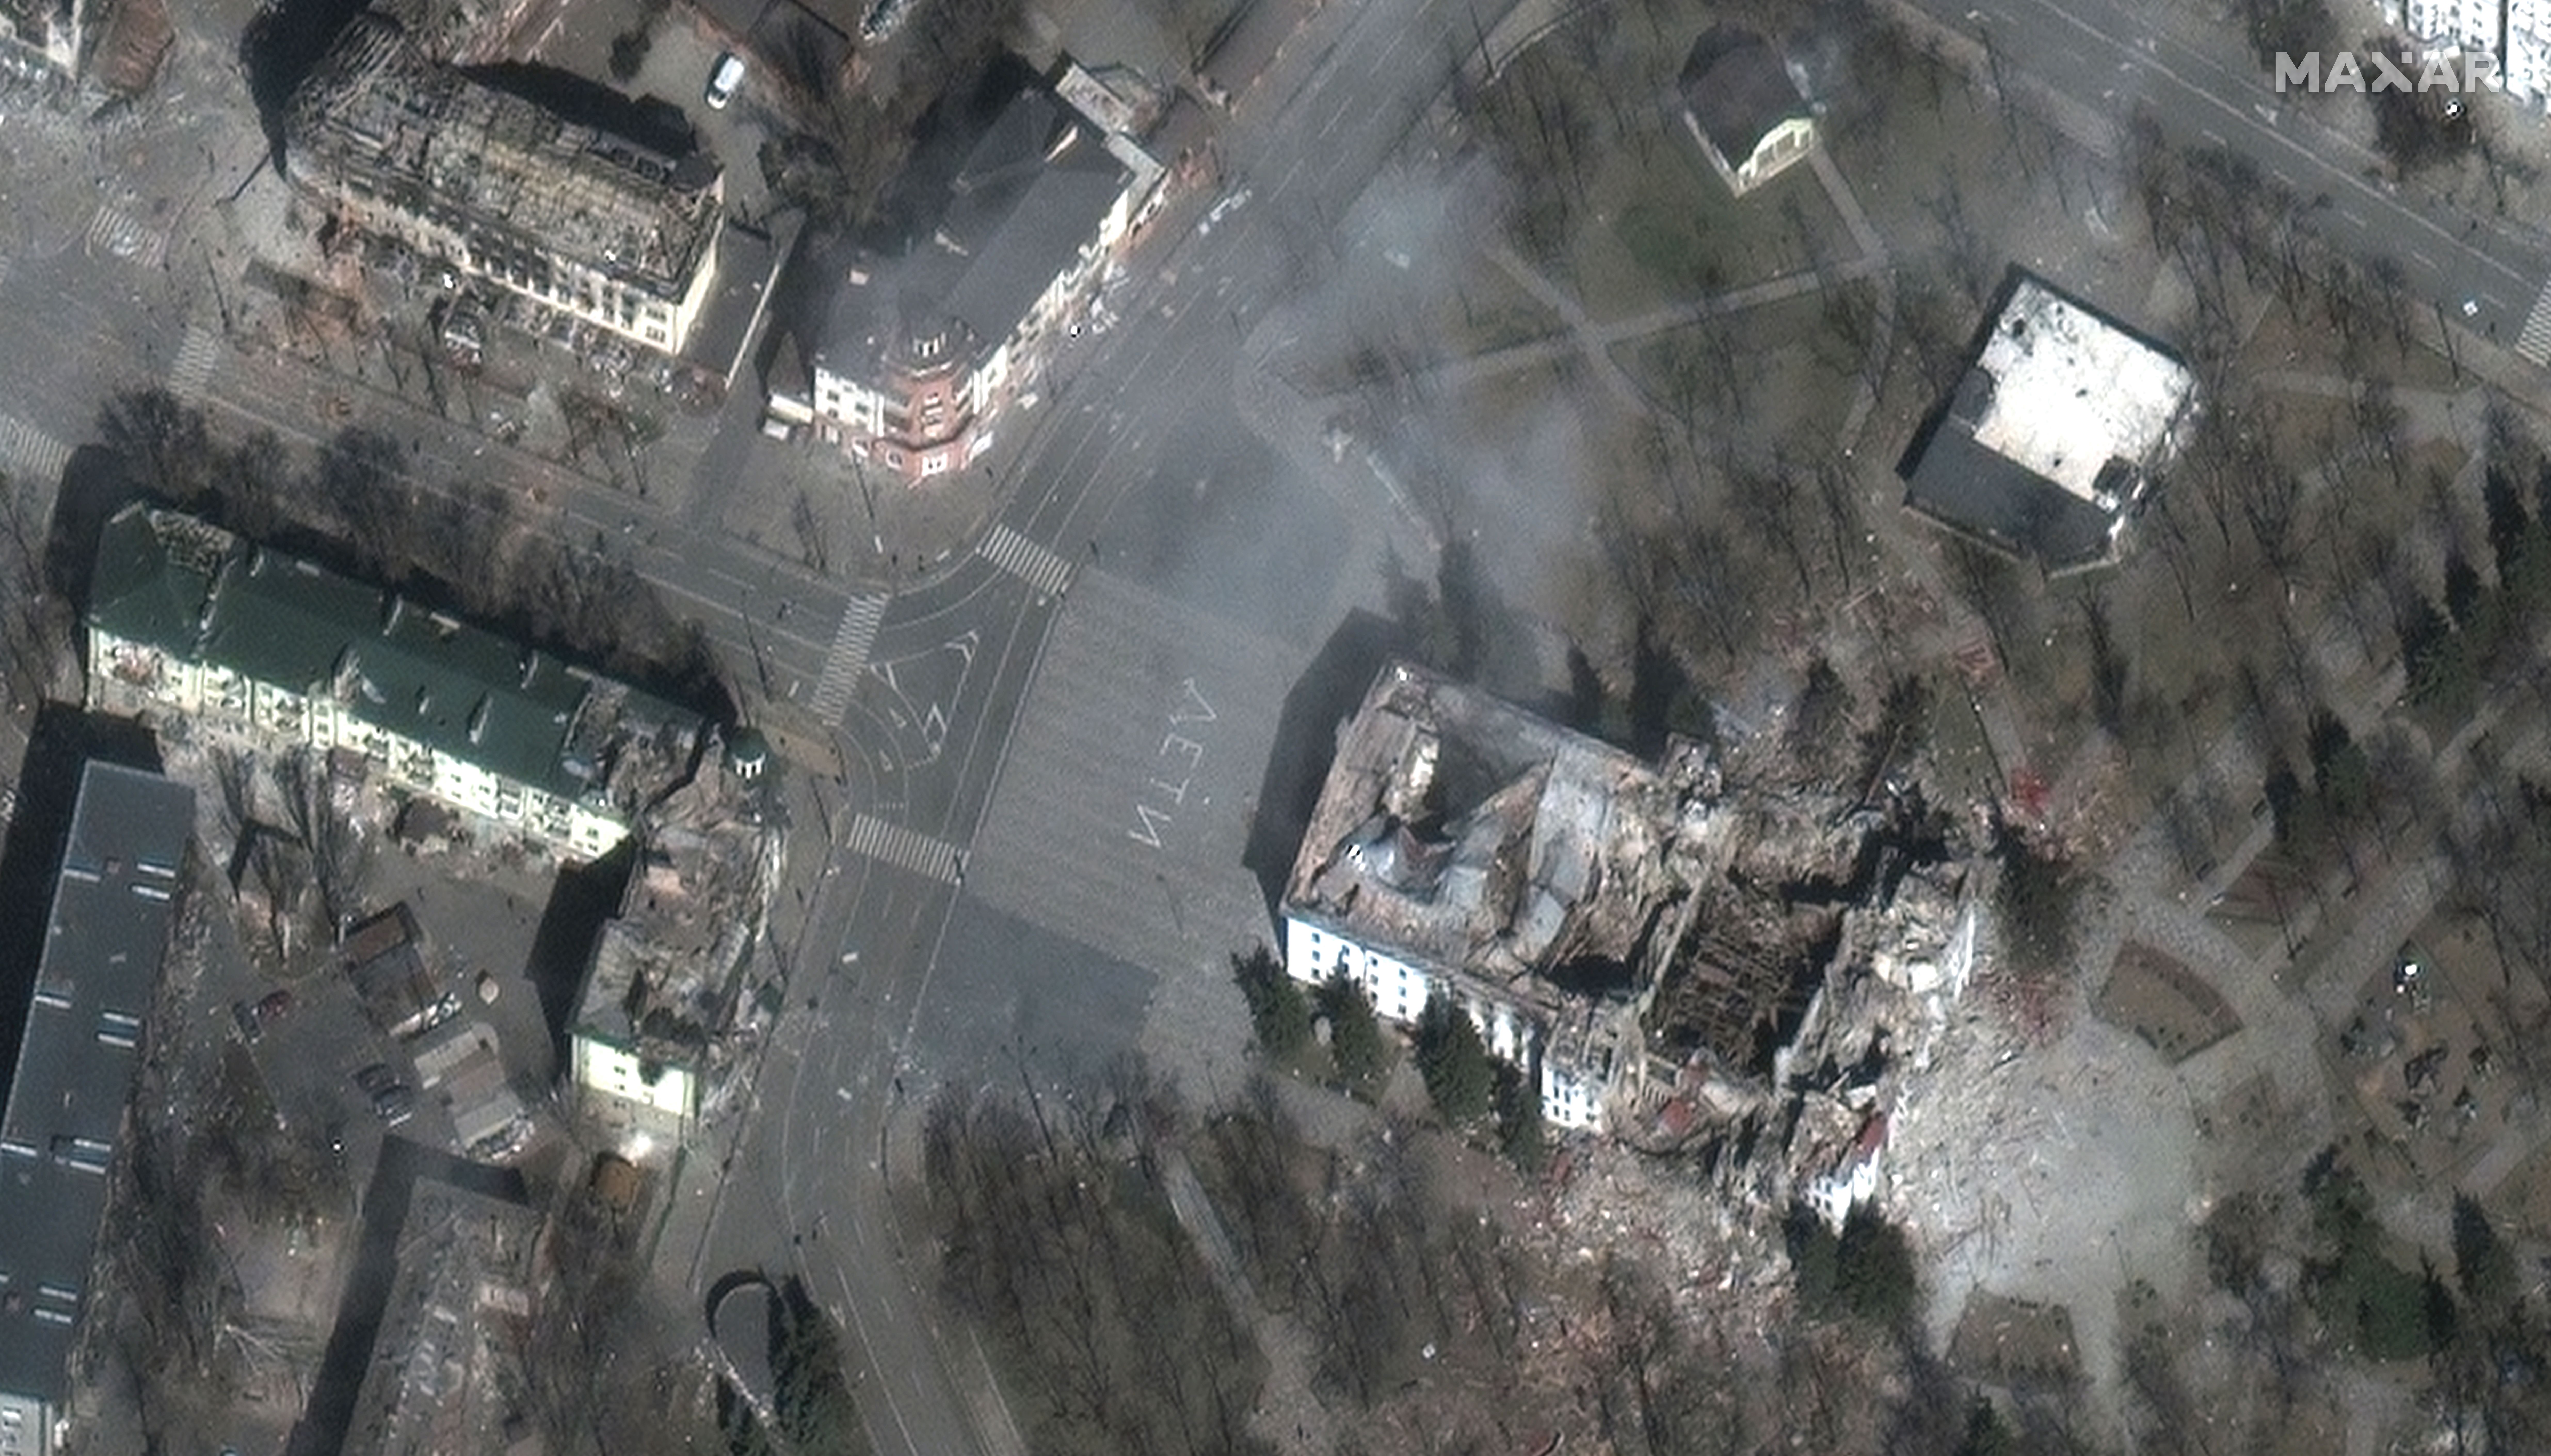 On March 29 the Mariupol Theater and its environs were badly damaged in the city of Mariupol.